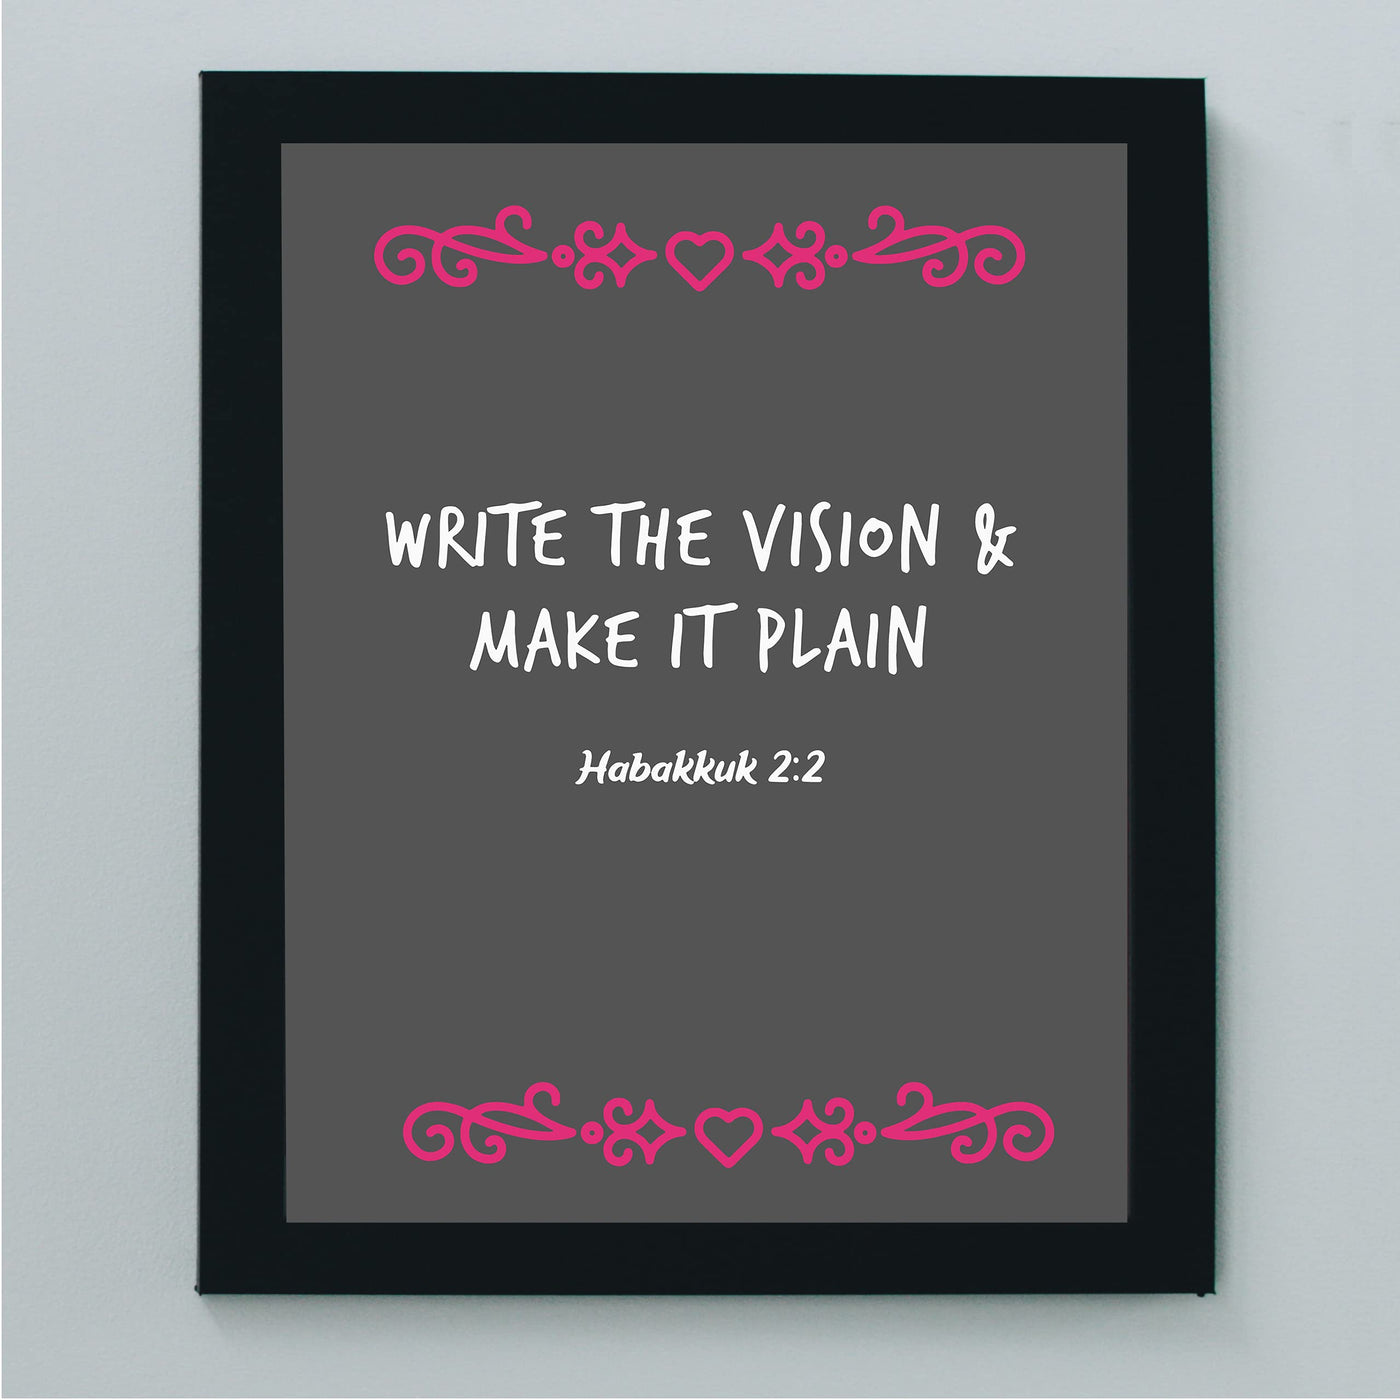 Write the Vision & Make It Plain-Habakkuk 2:2 -Bible Verse Wall Art-8 x 10" Inspirational Christian Print -Ready to Frame. Modern Scripture Print for Home-Office-Church Decor. Great Religious Gift!